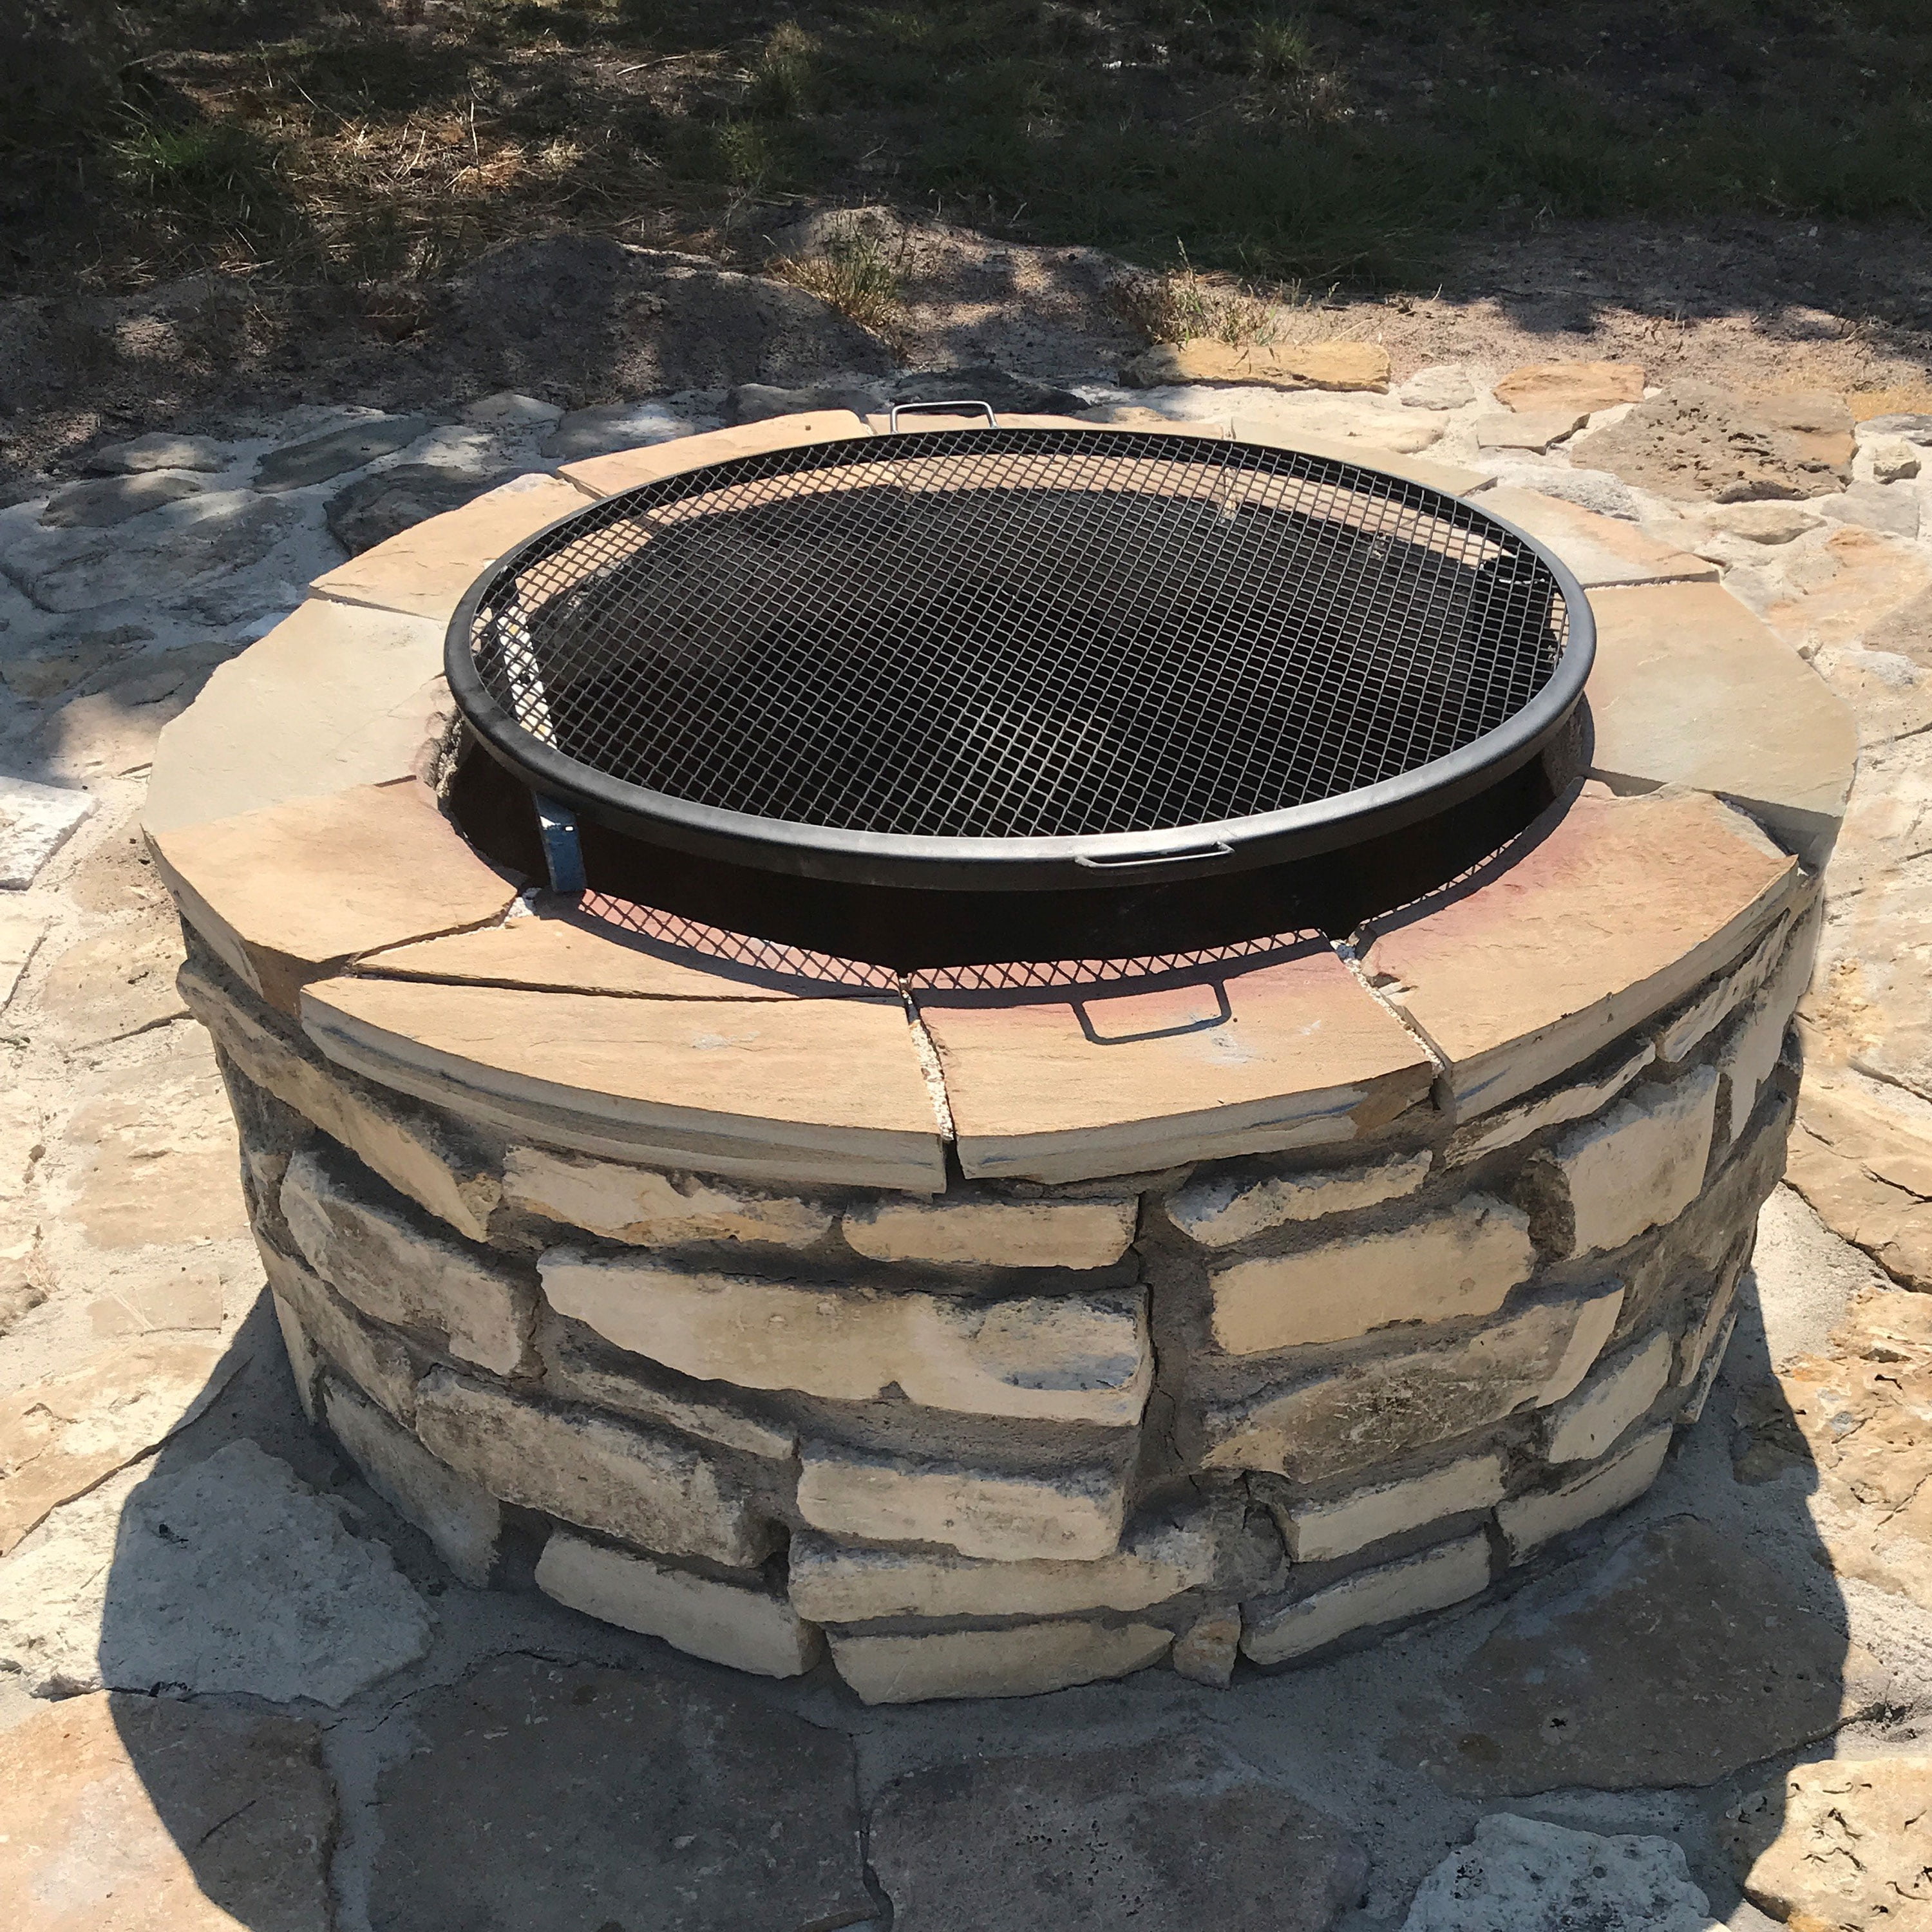 Outdoor Fire Pit Grill Accessory, 36 Inch Round Grate For Outdoor Fire Pits